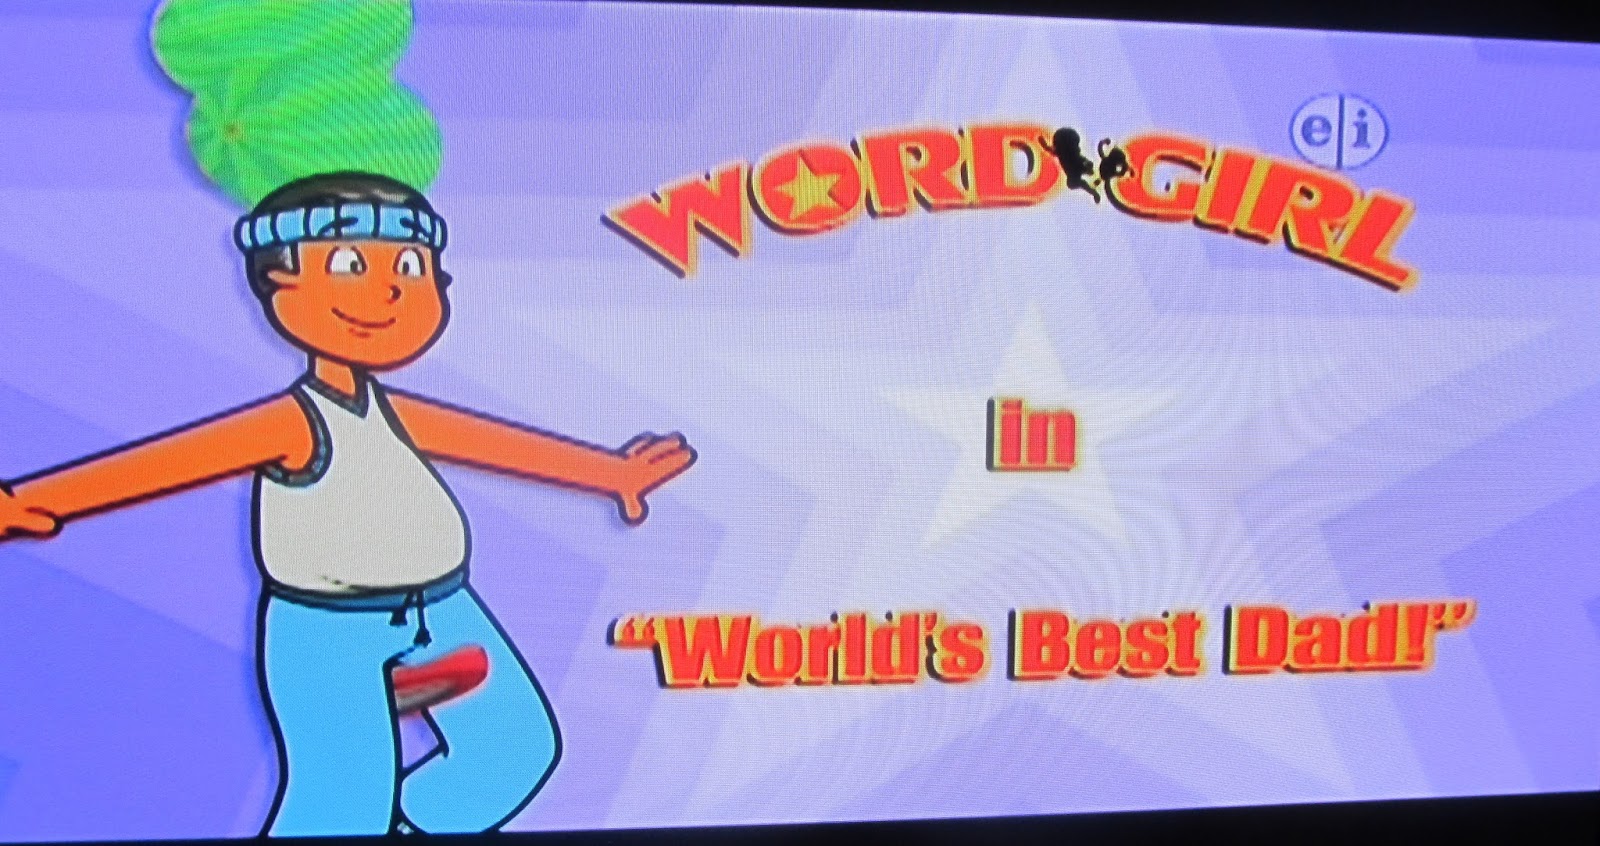 Pbs Porn - Daily Campello Art News: Porn in Word Girl?